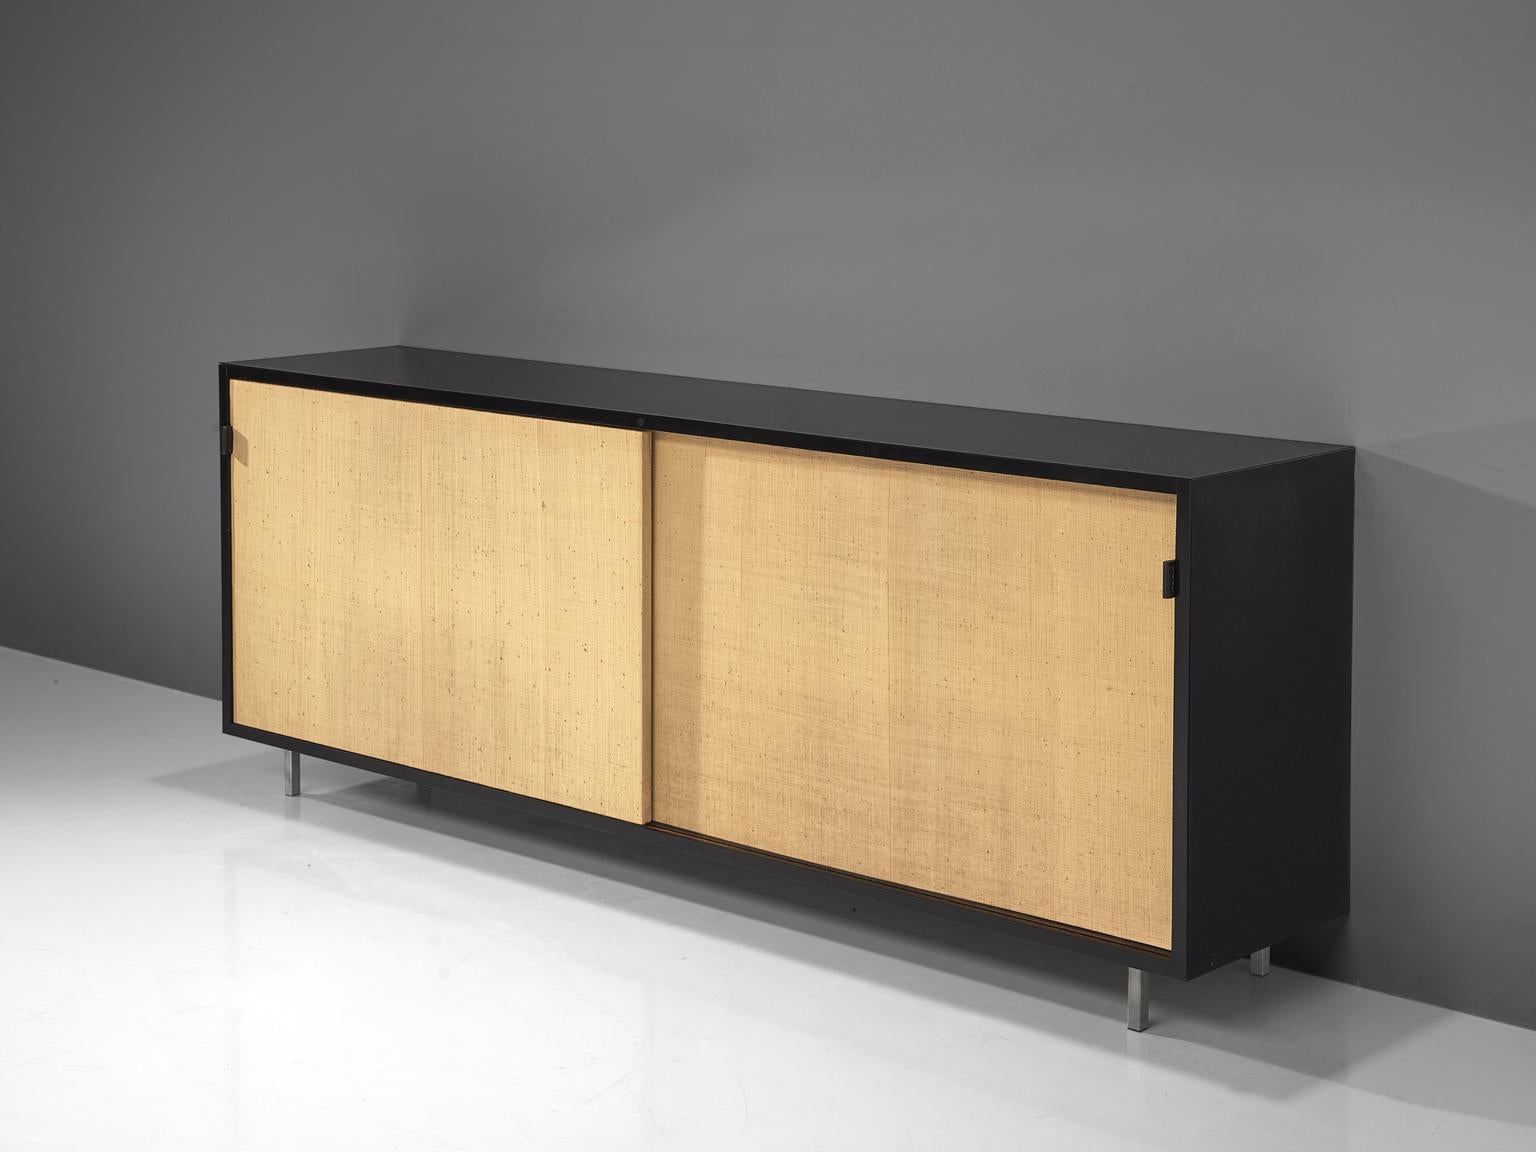 Florence Knoll for Knoll, cane, ebonized wood, metal, cane, United States, 1961.

This sideboard is designed by Florence Knoll for Knoll International and was meant for the headquarters of Knoll in Italy. The credenza is executed with two large